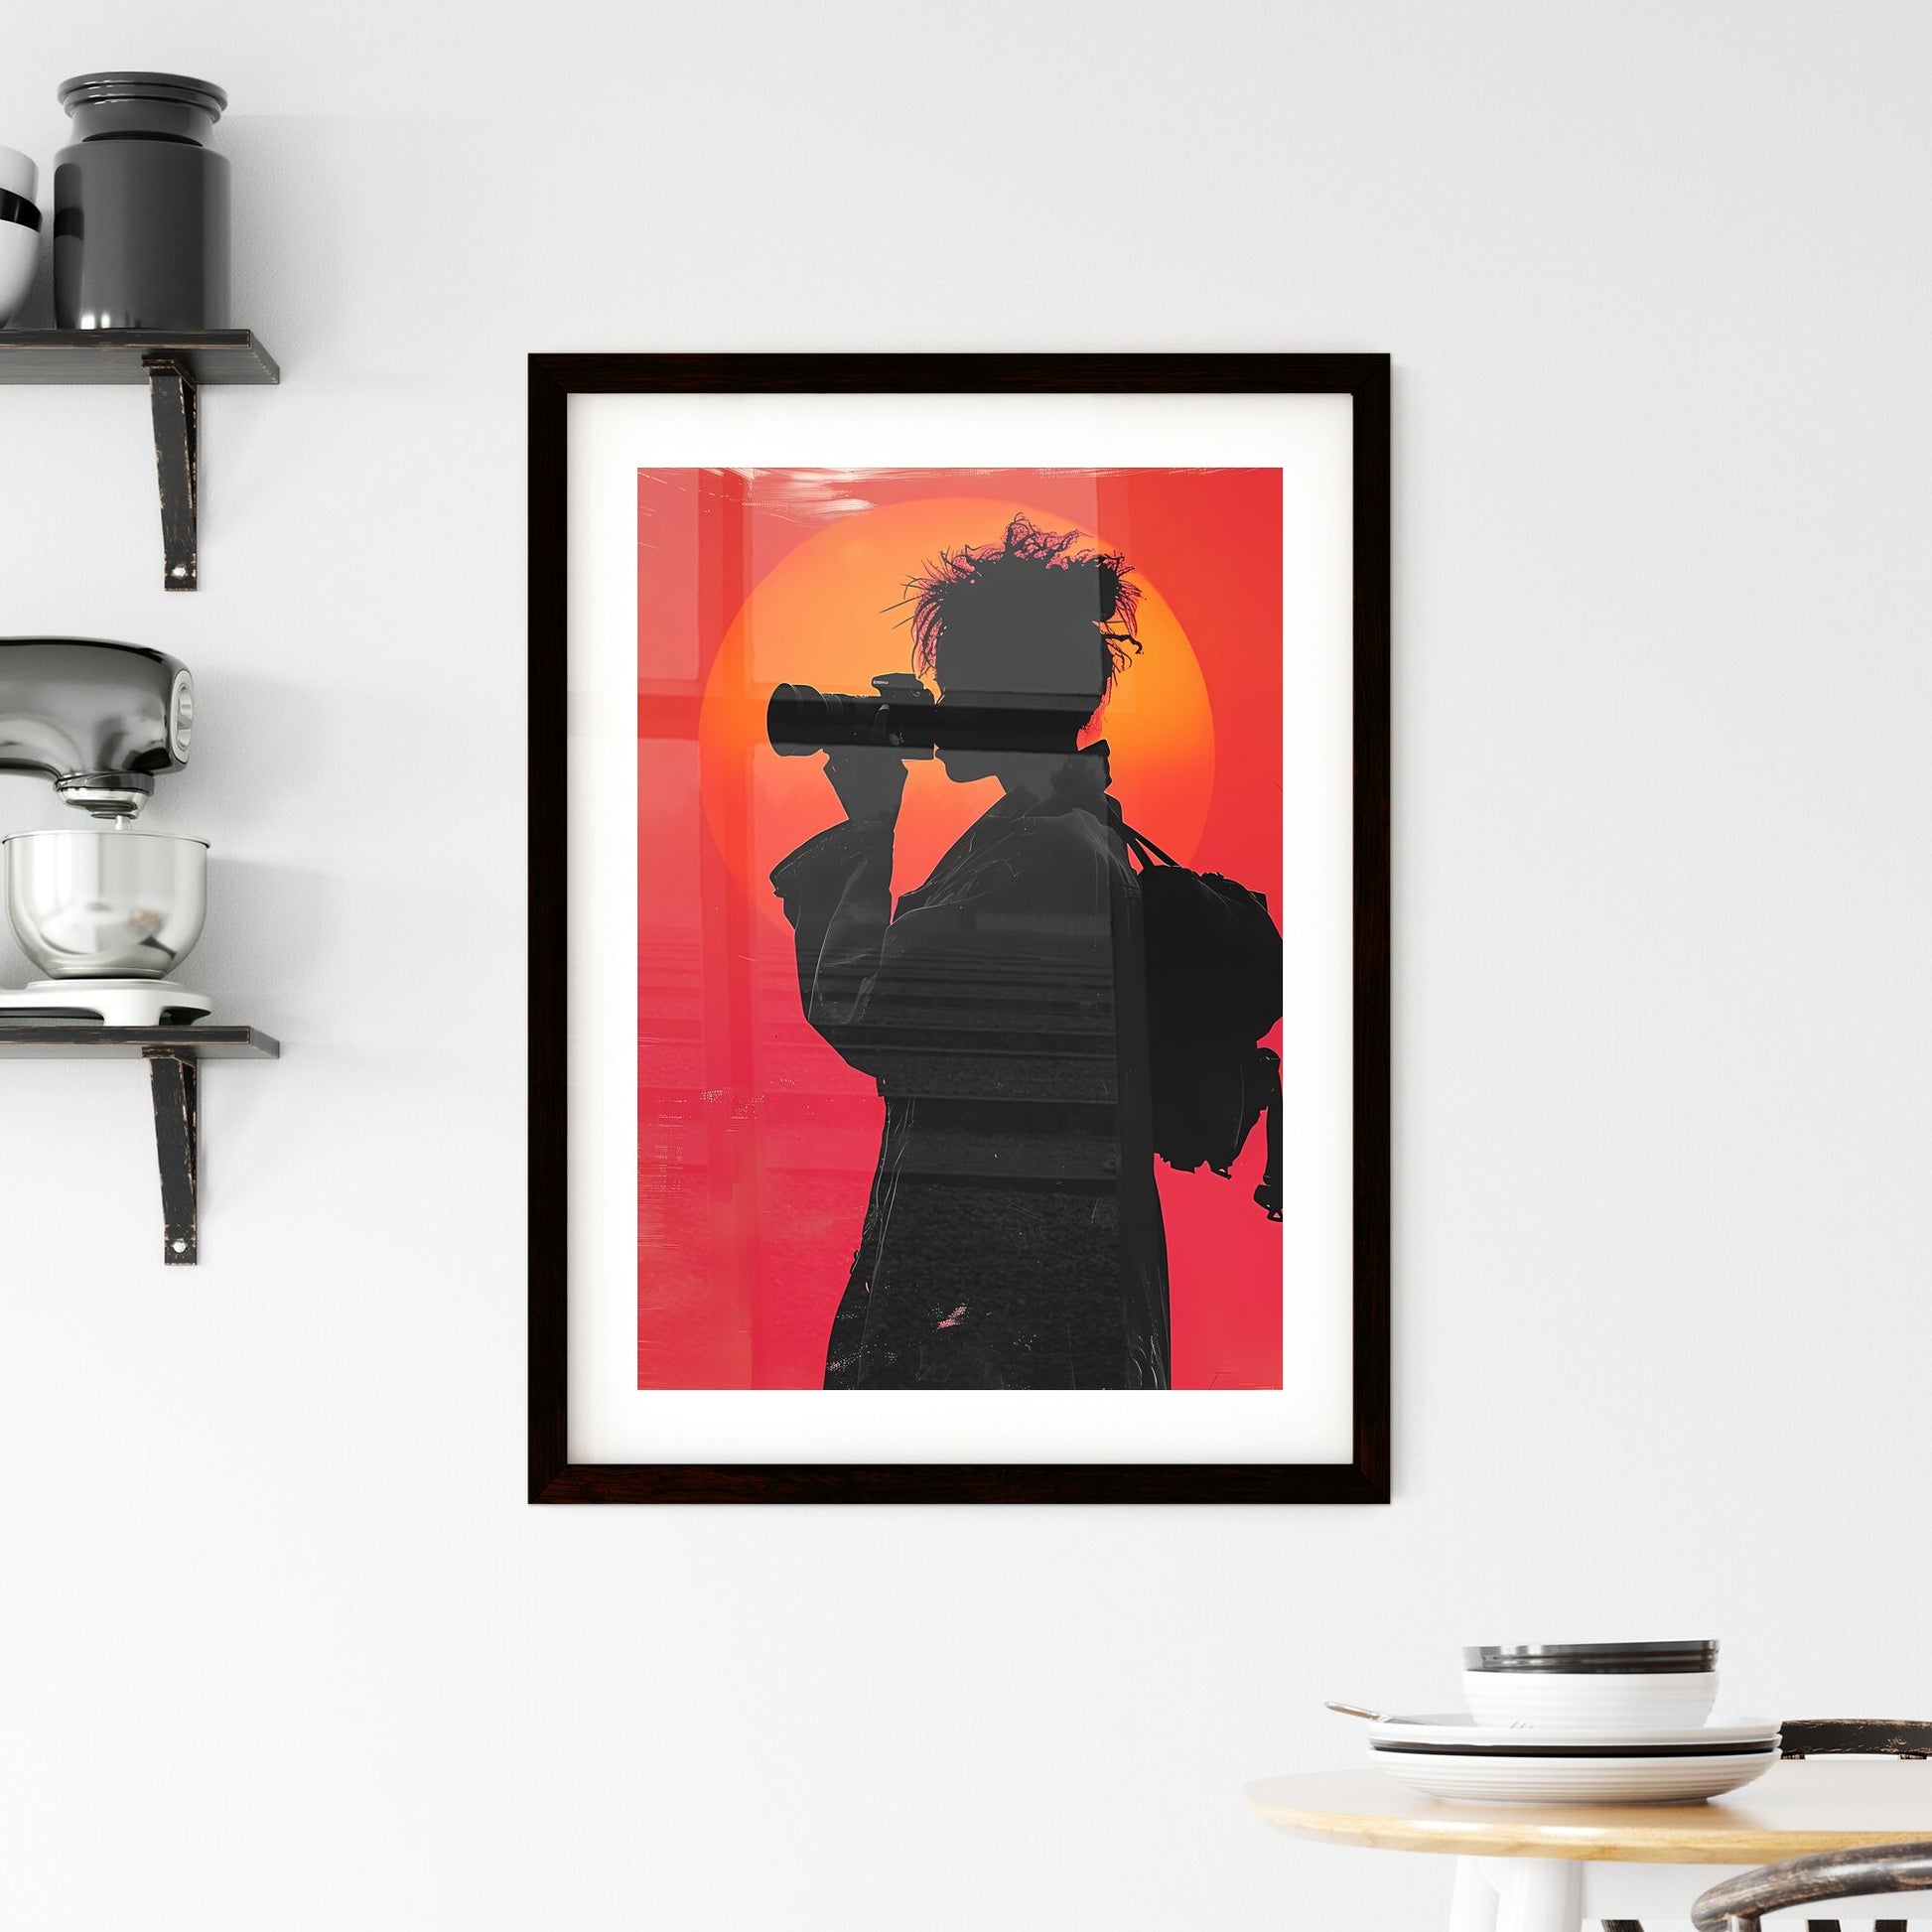 A trendy young person records - Art print of a silhouette of a woman holding a camera Default Title